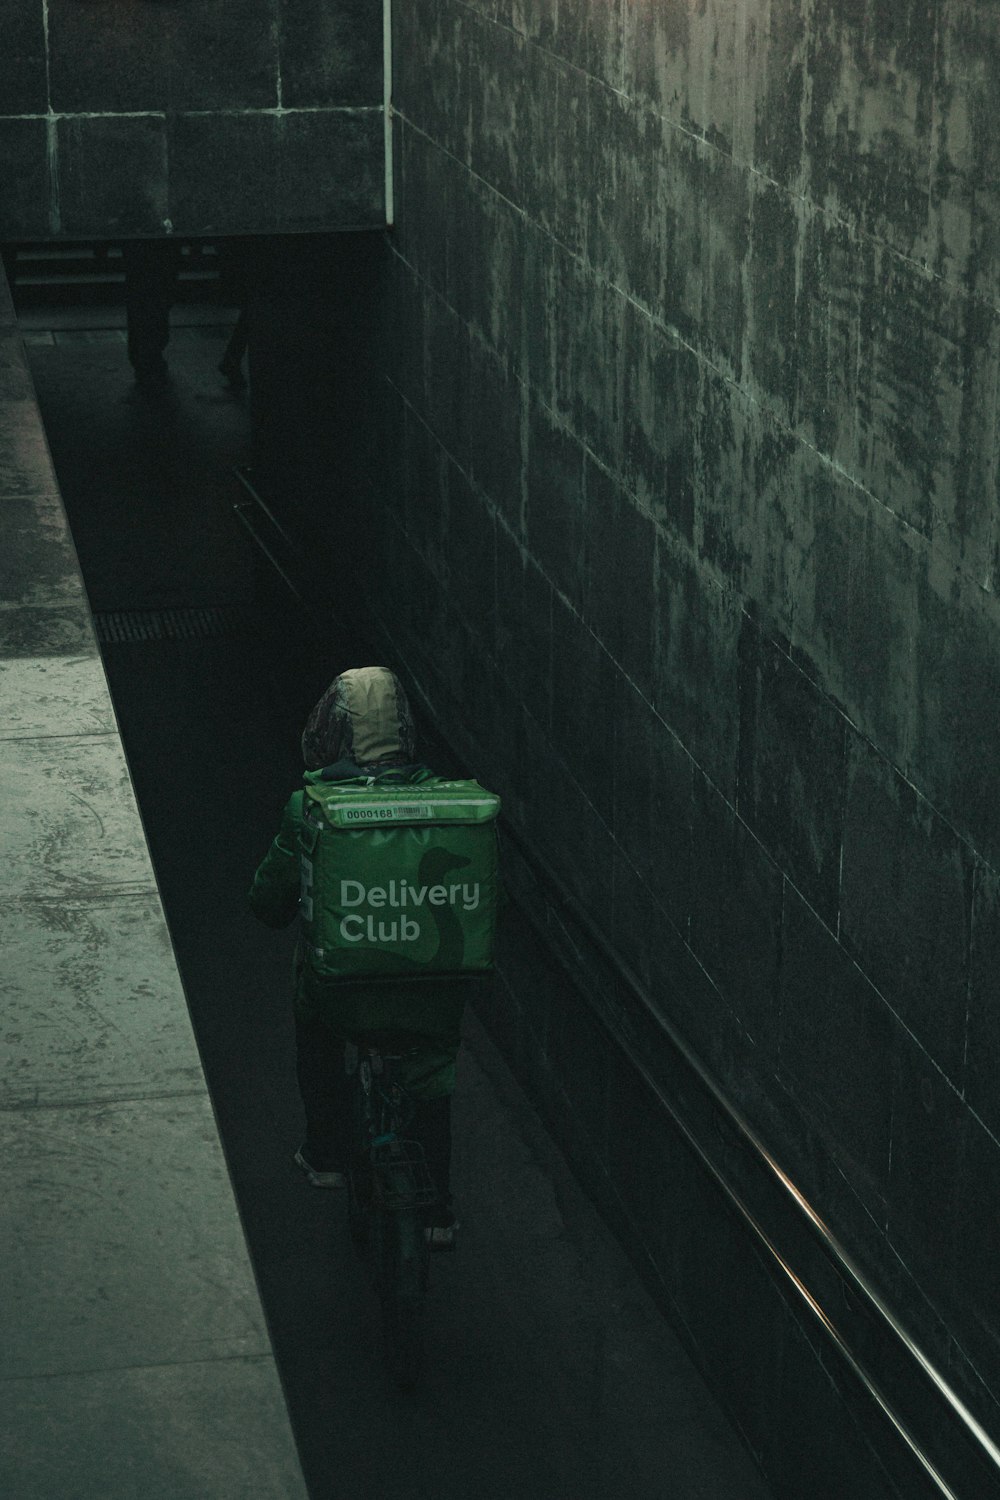 a person riding a bike with a delivery box on the back of it